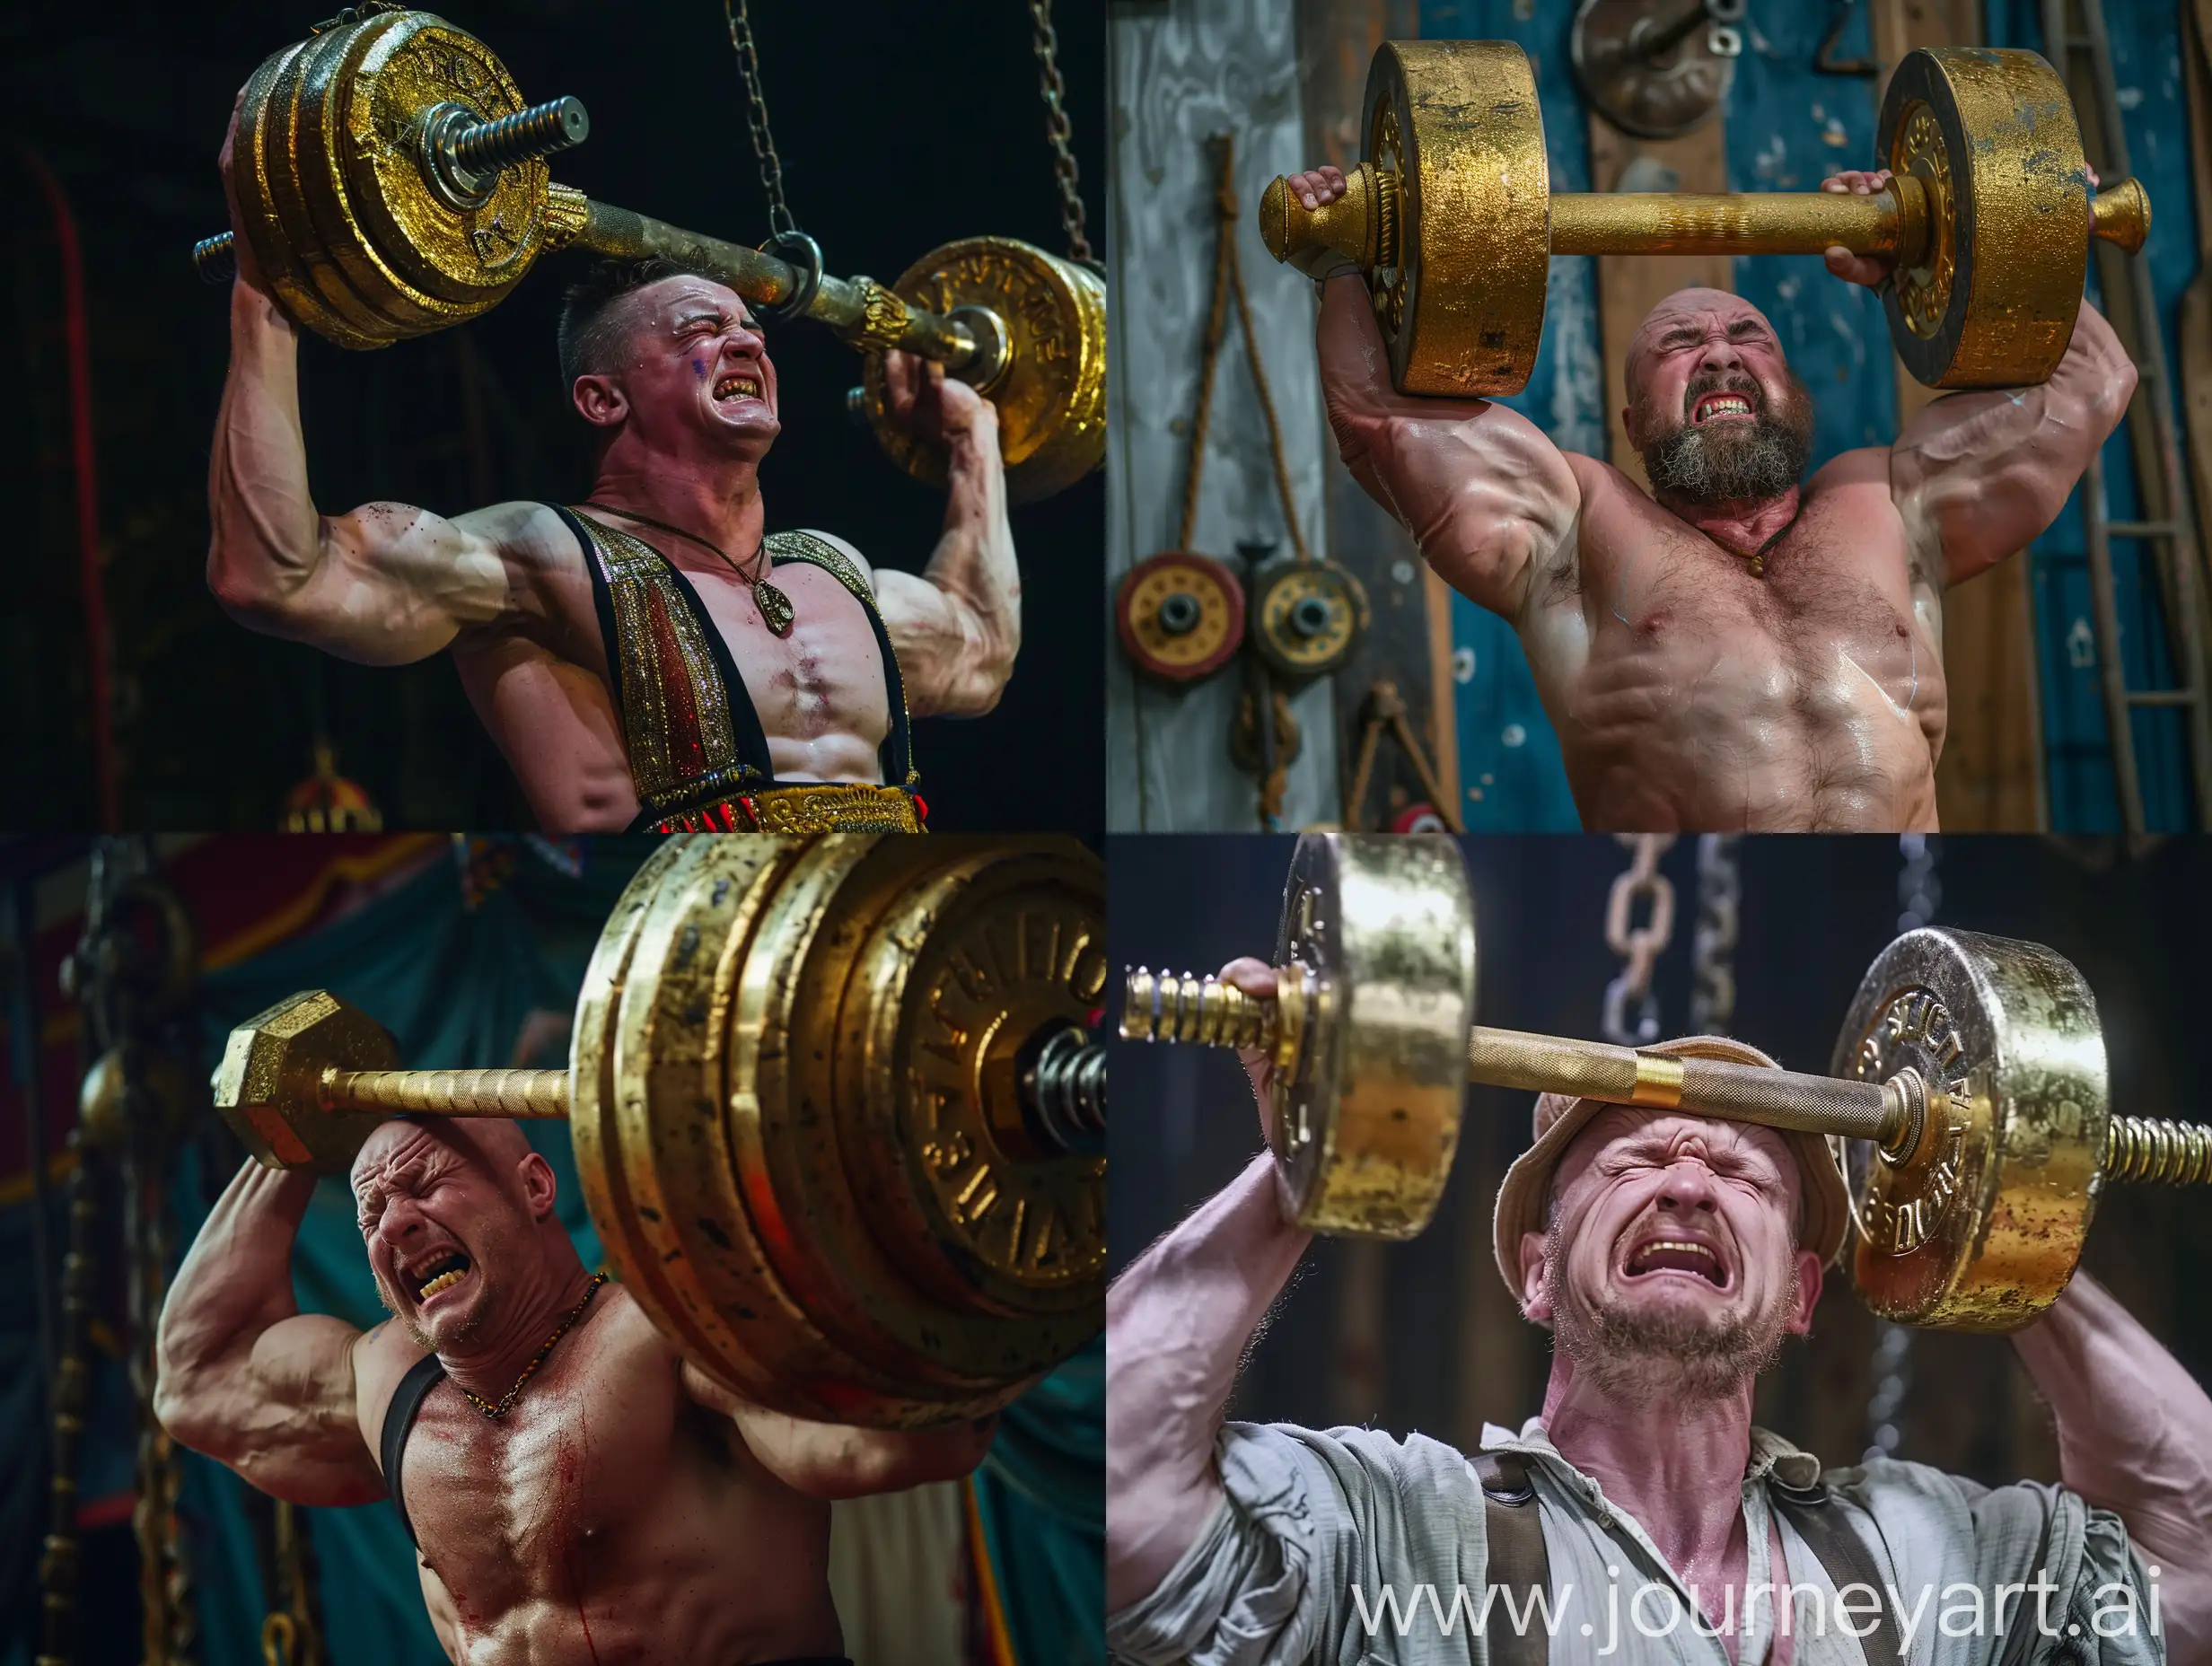 Emotional-Russian-Circus-Strongman-Lifts-Heavy-Golden-Dumbbell